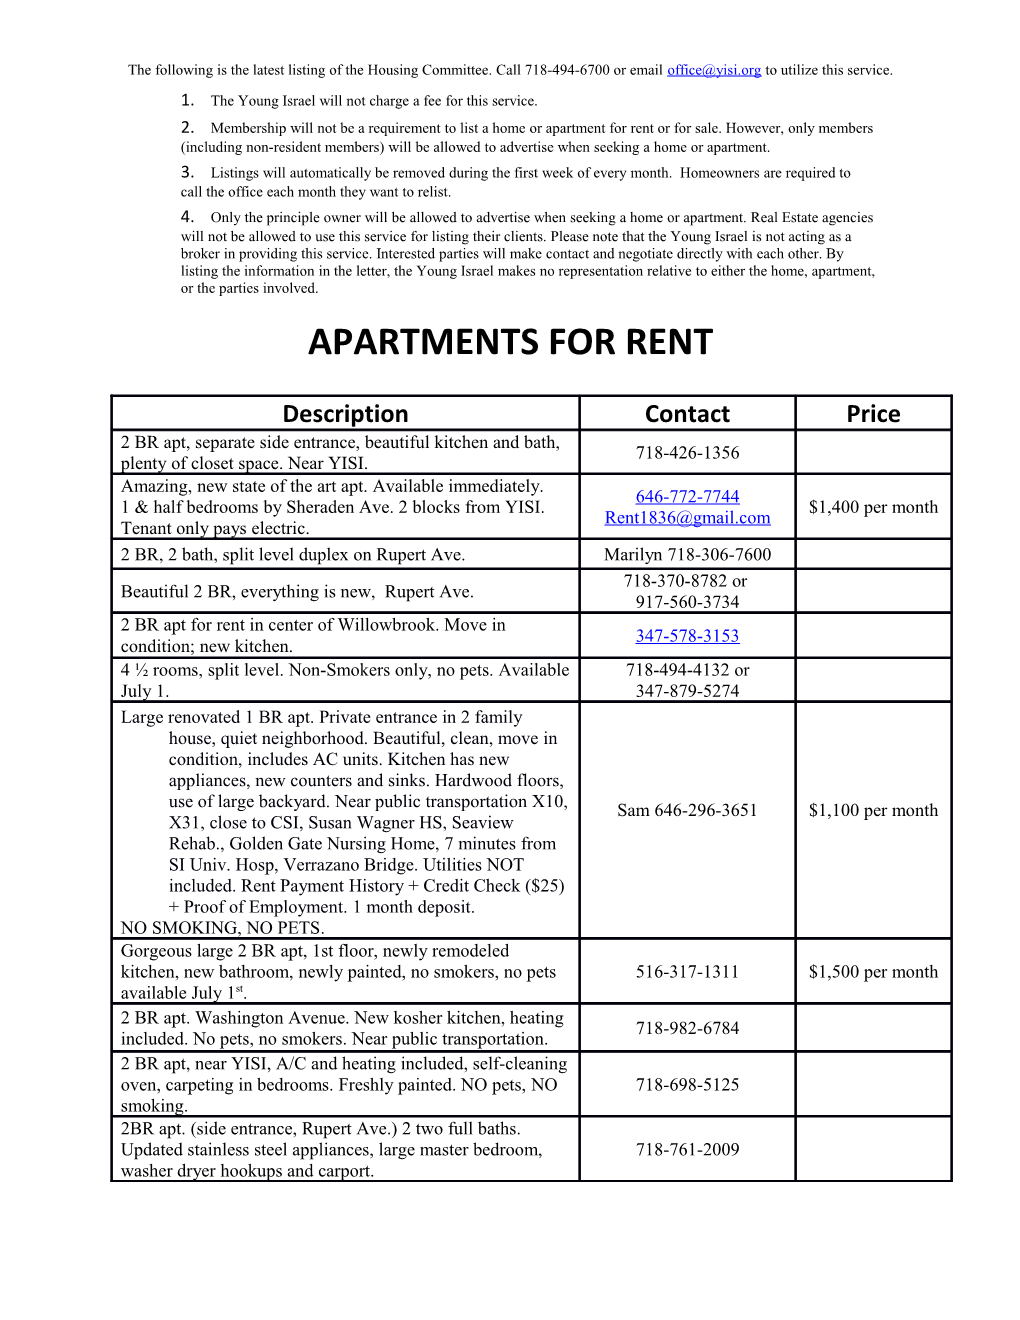 The Following Is the Latest Listing of the Housing Committee. Call 718-494-6700 Or Email